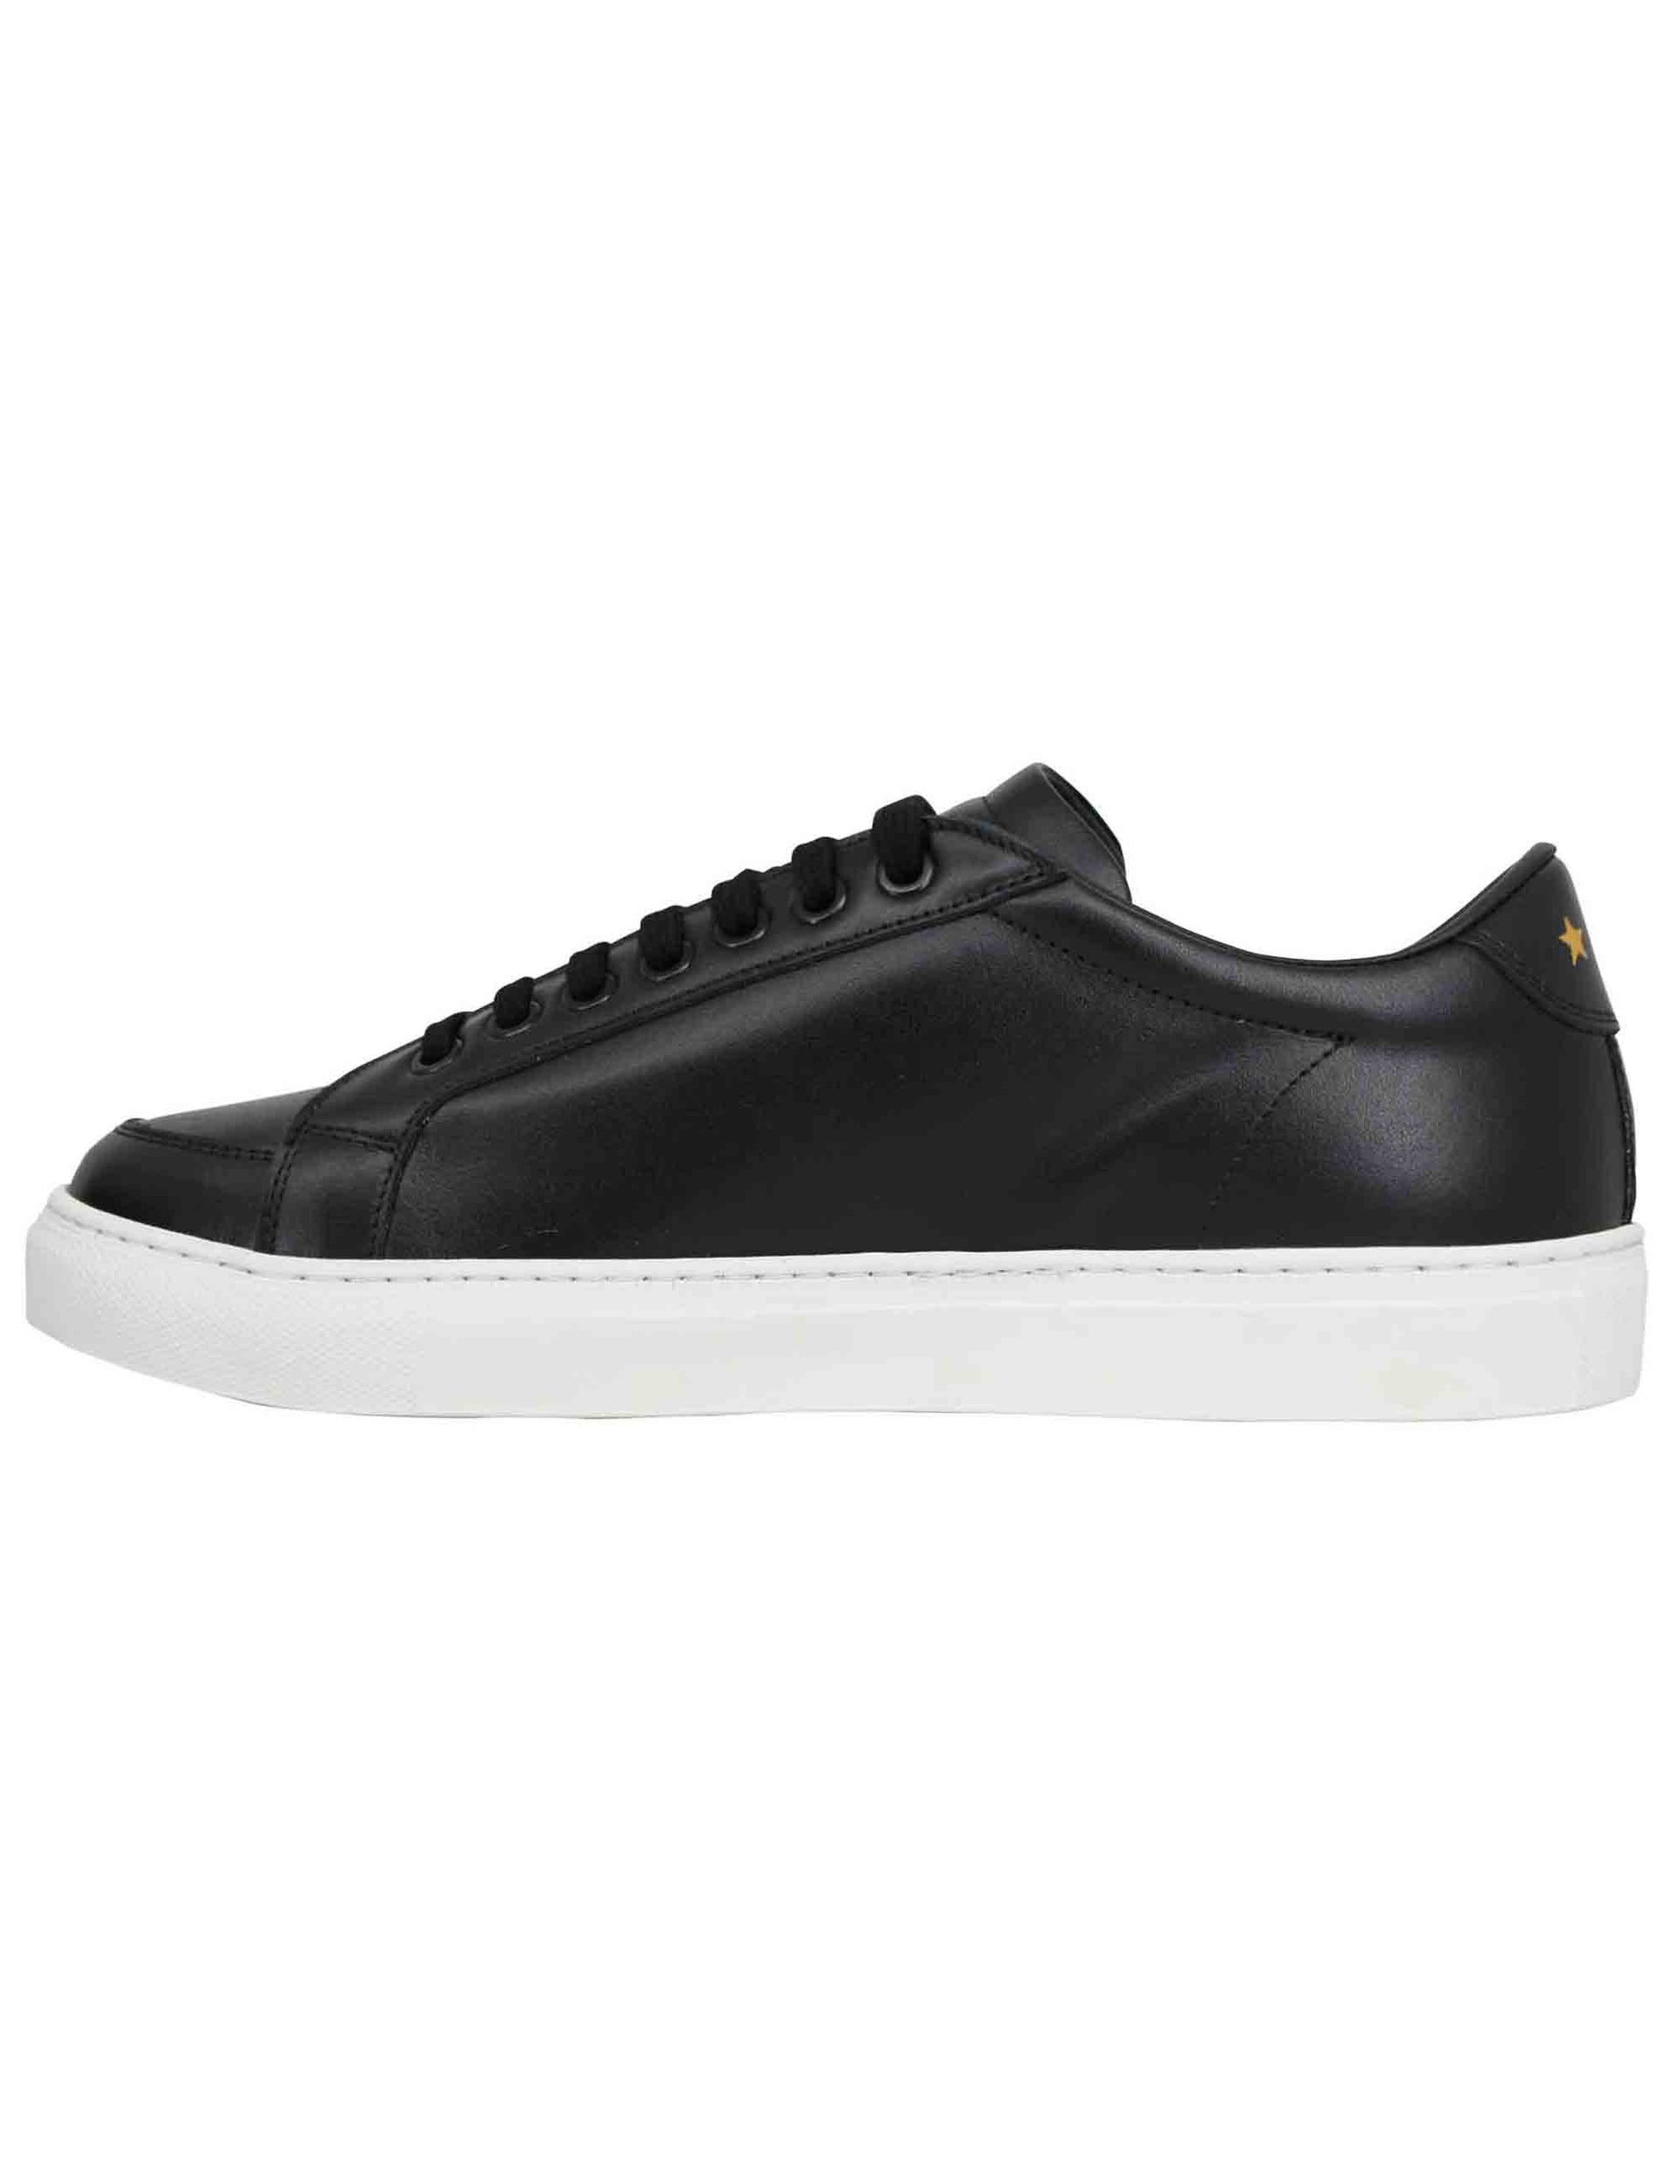 Sneakers uomo Top spin in pelle nera